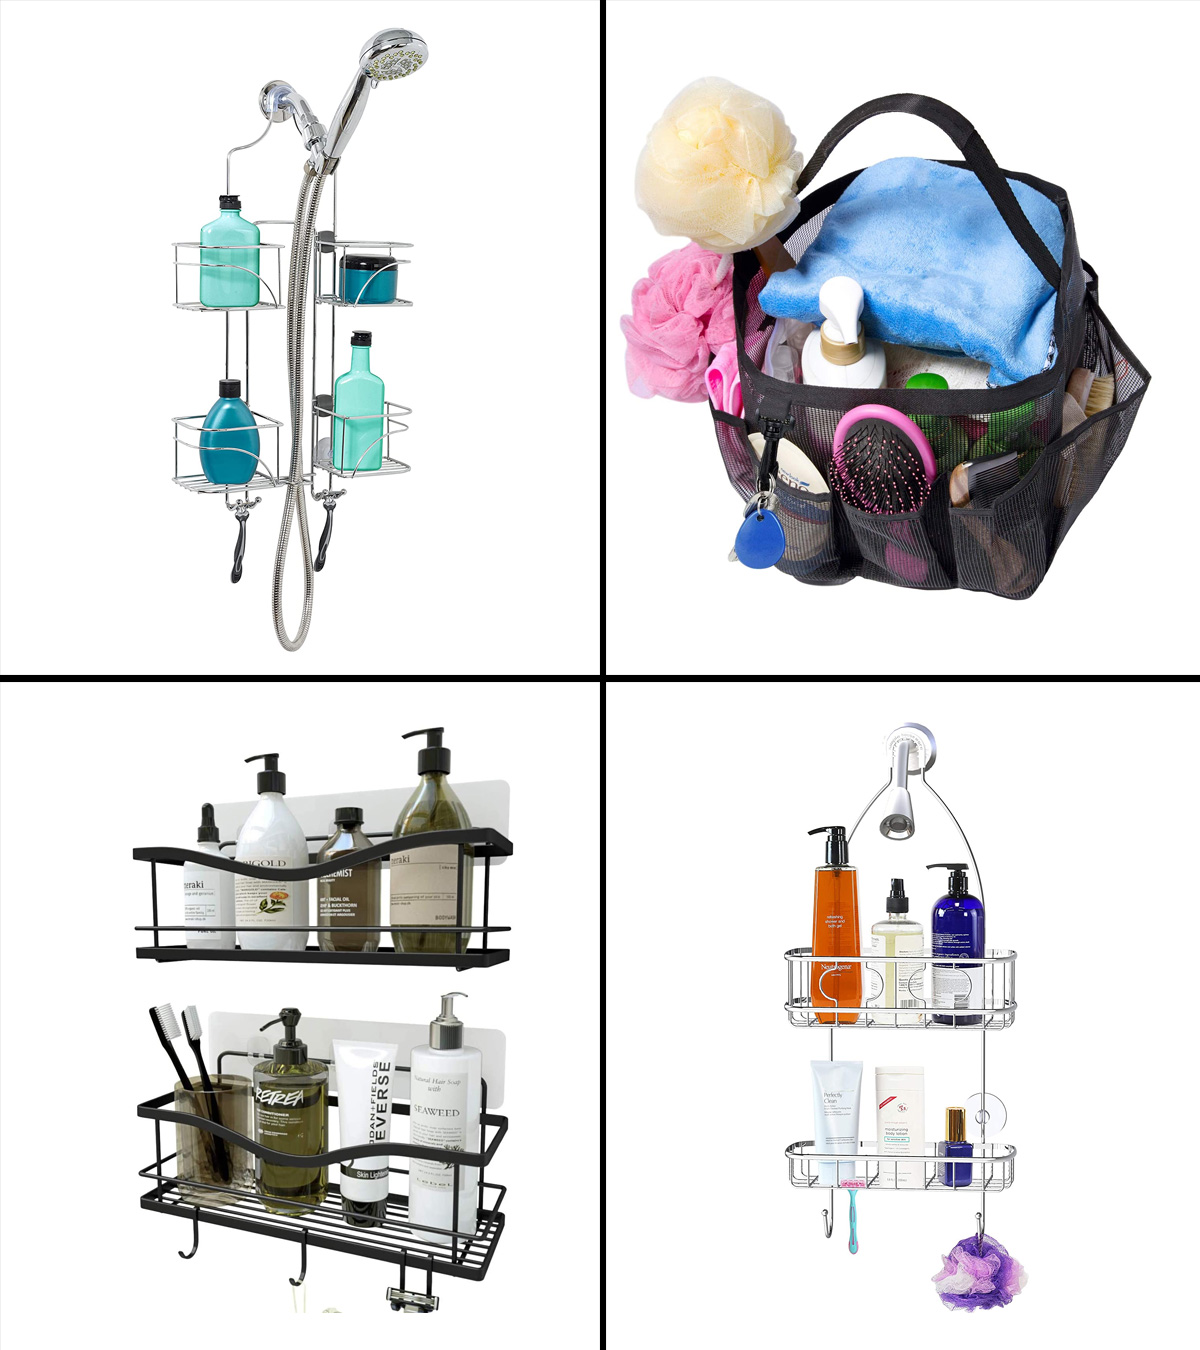 The Best Shower Caddy You Can Buy for College Dorm Life